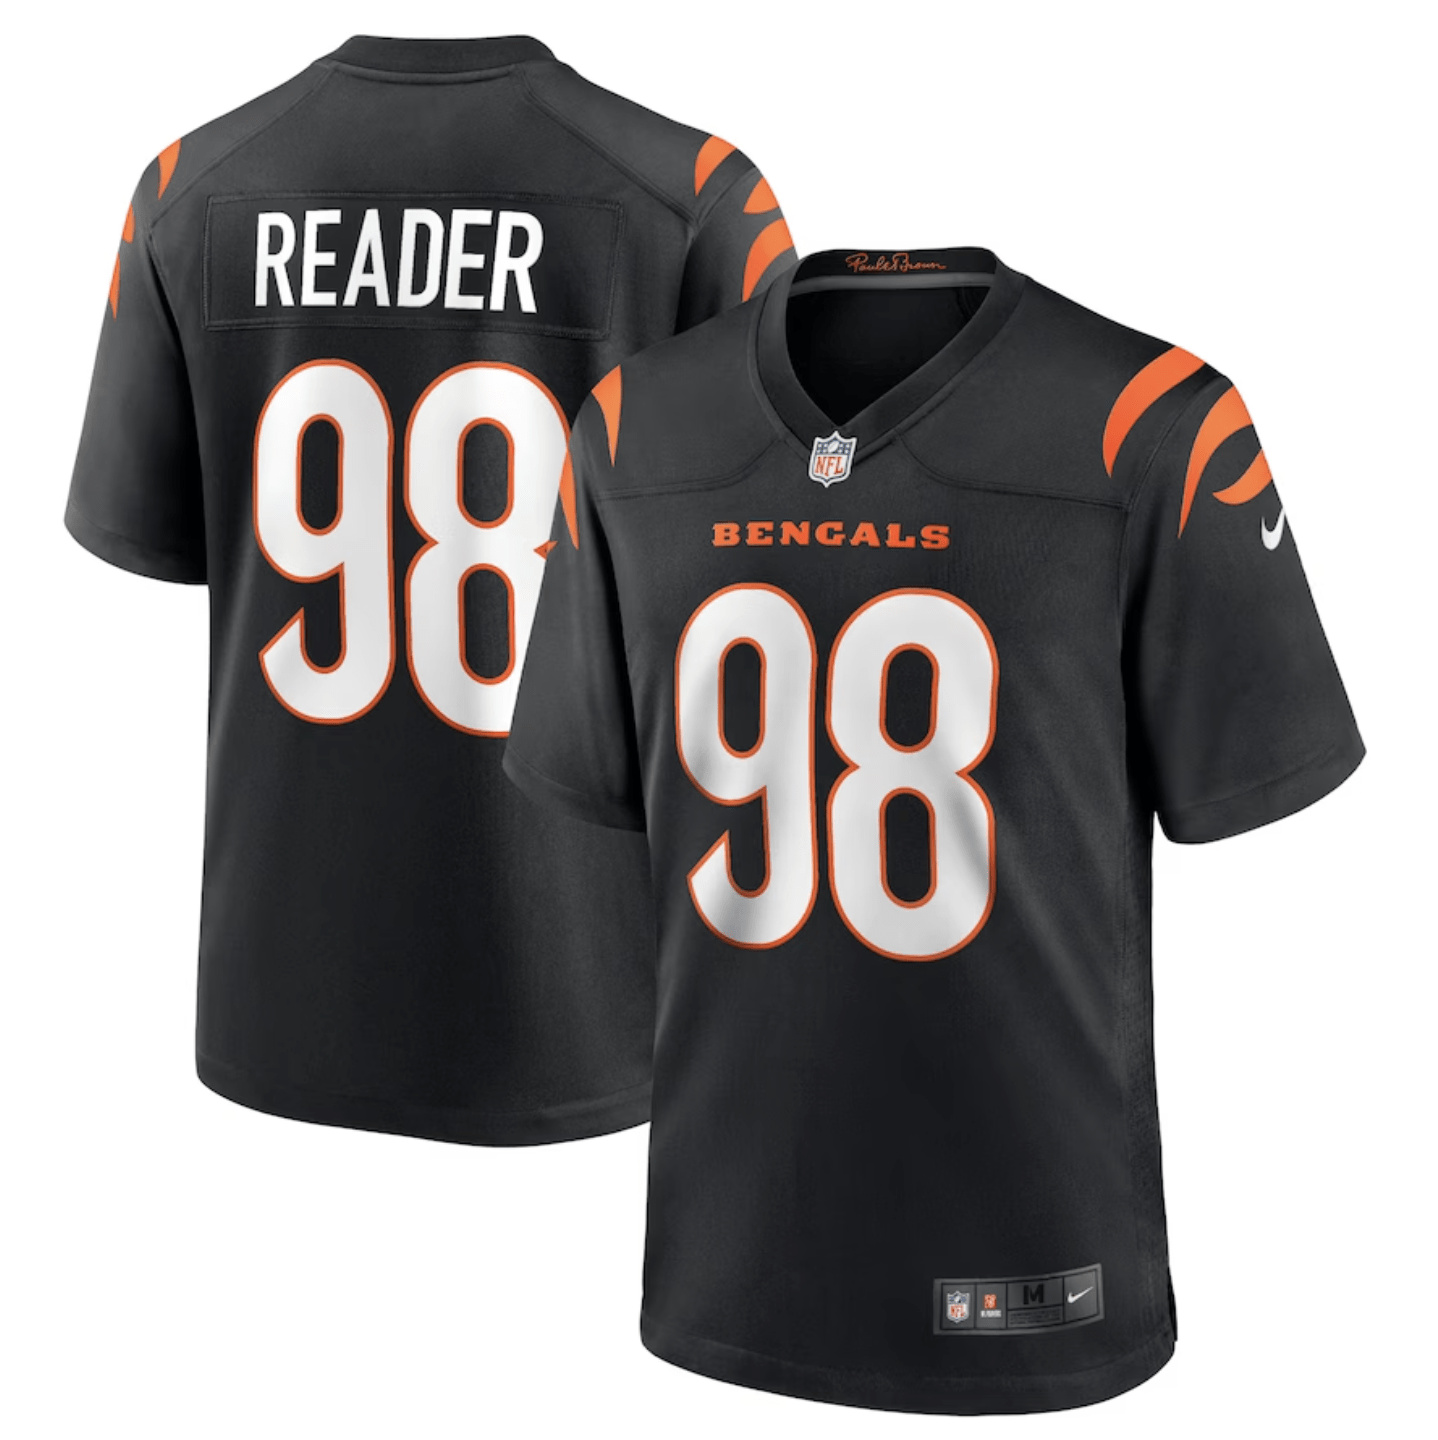 Top 5 Sports Jerseys for Readers